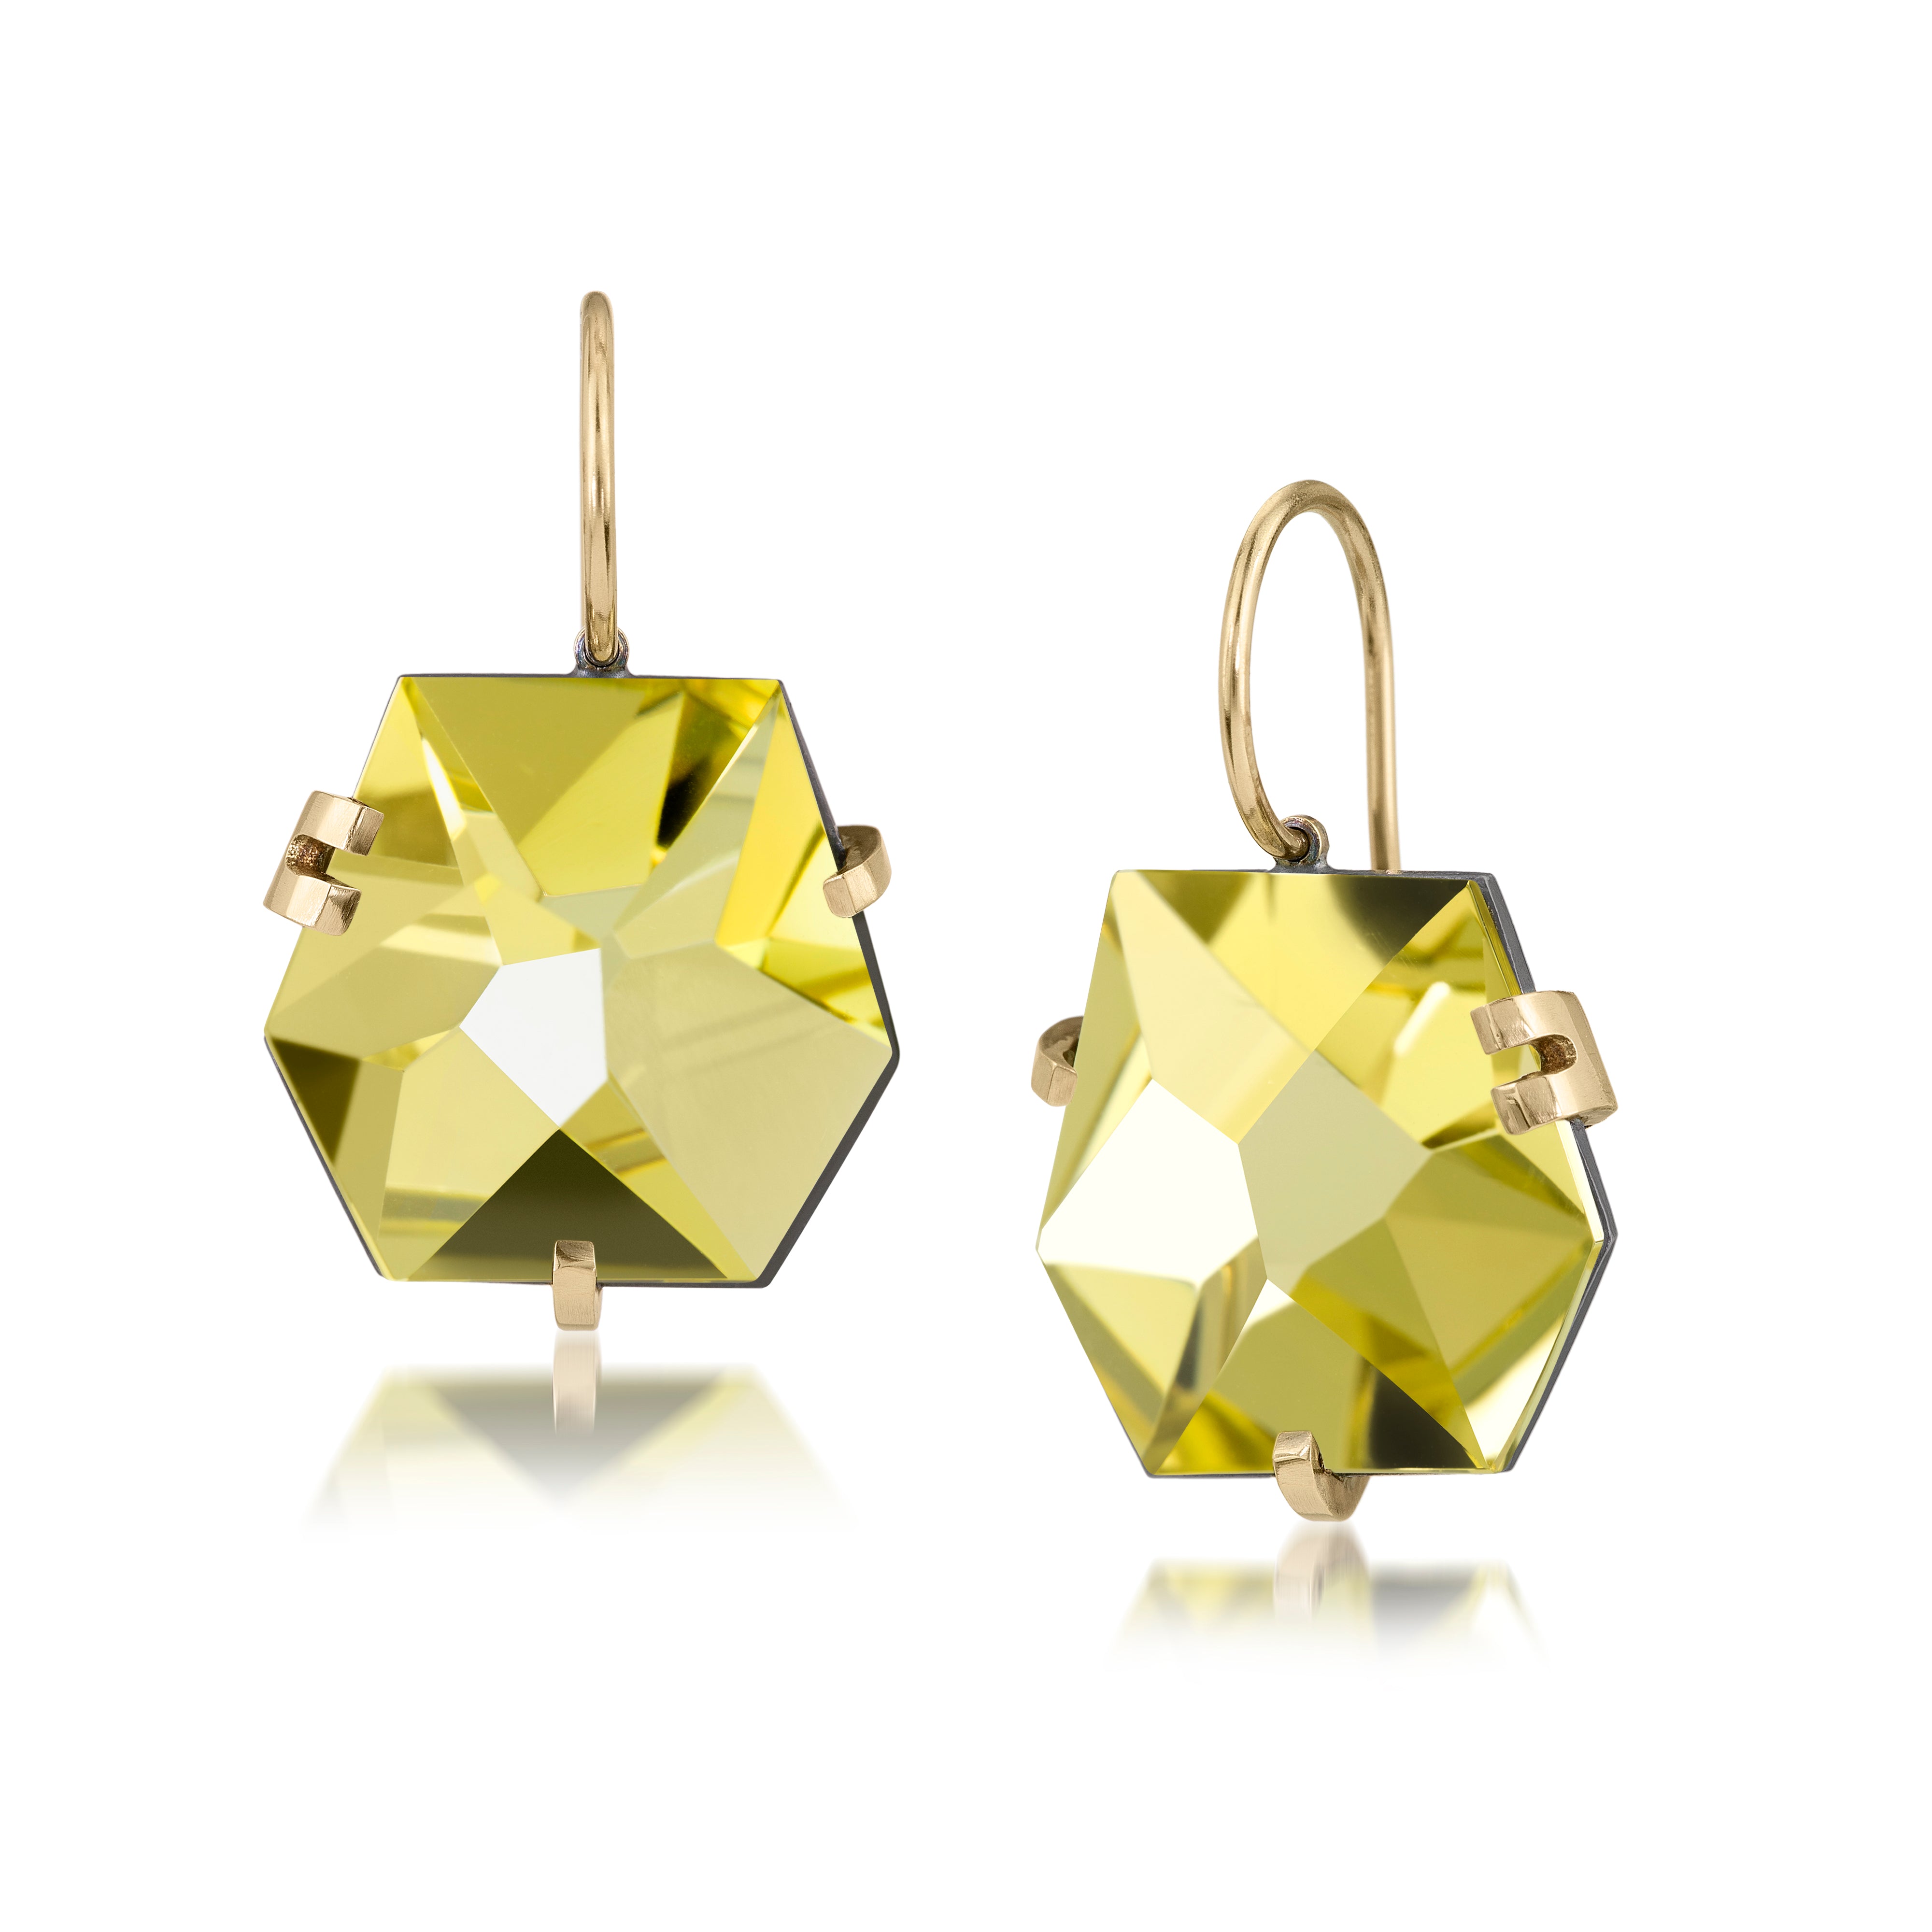 Facets earring, size small in oxidized sterling and 18k gold set with natural gemstones. Unique, hand cut, faceted chunks of natural gem prong set in 18k gold prongs and hanging from 18k ear wires.